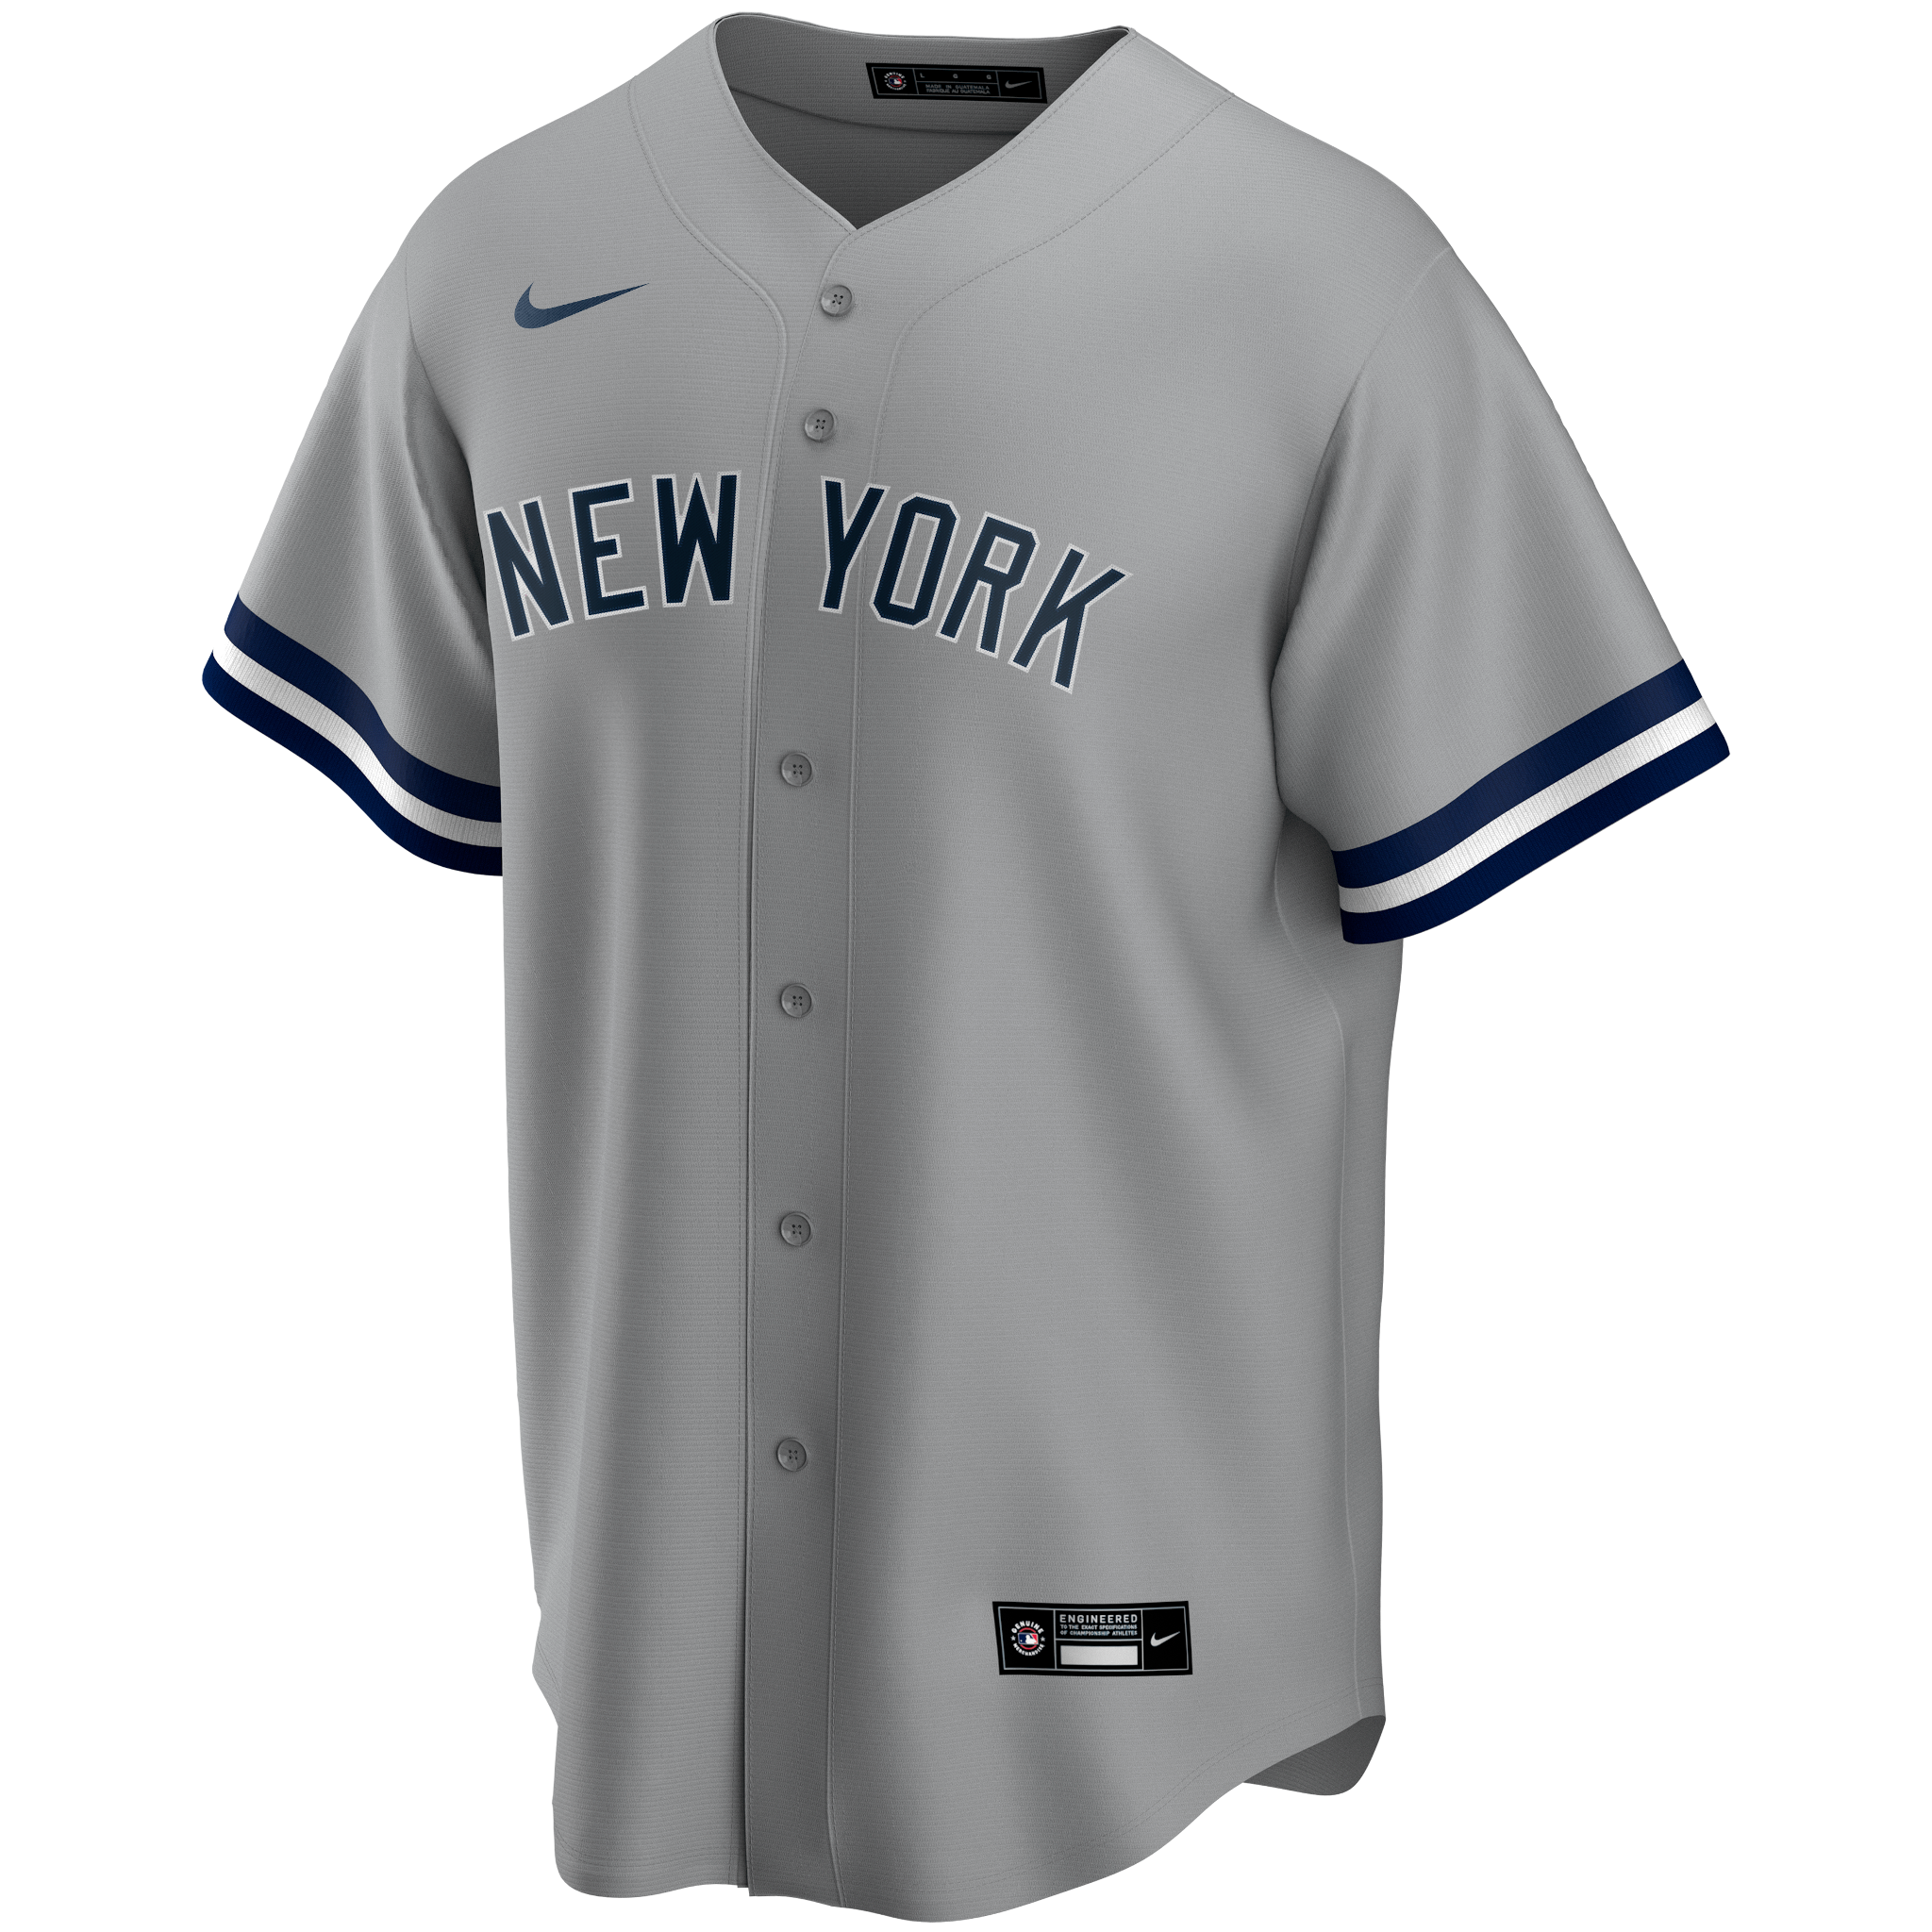 Collectible New York Yankees Jerseys for sale near Vancouver